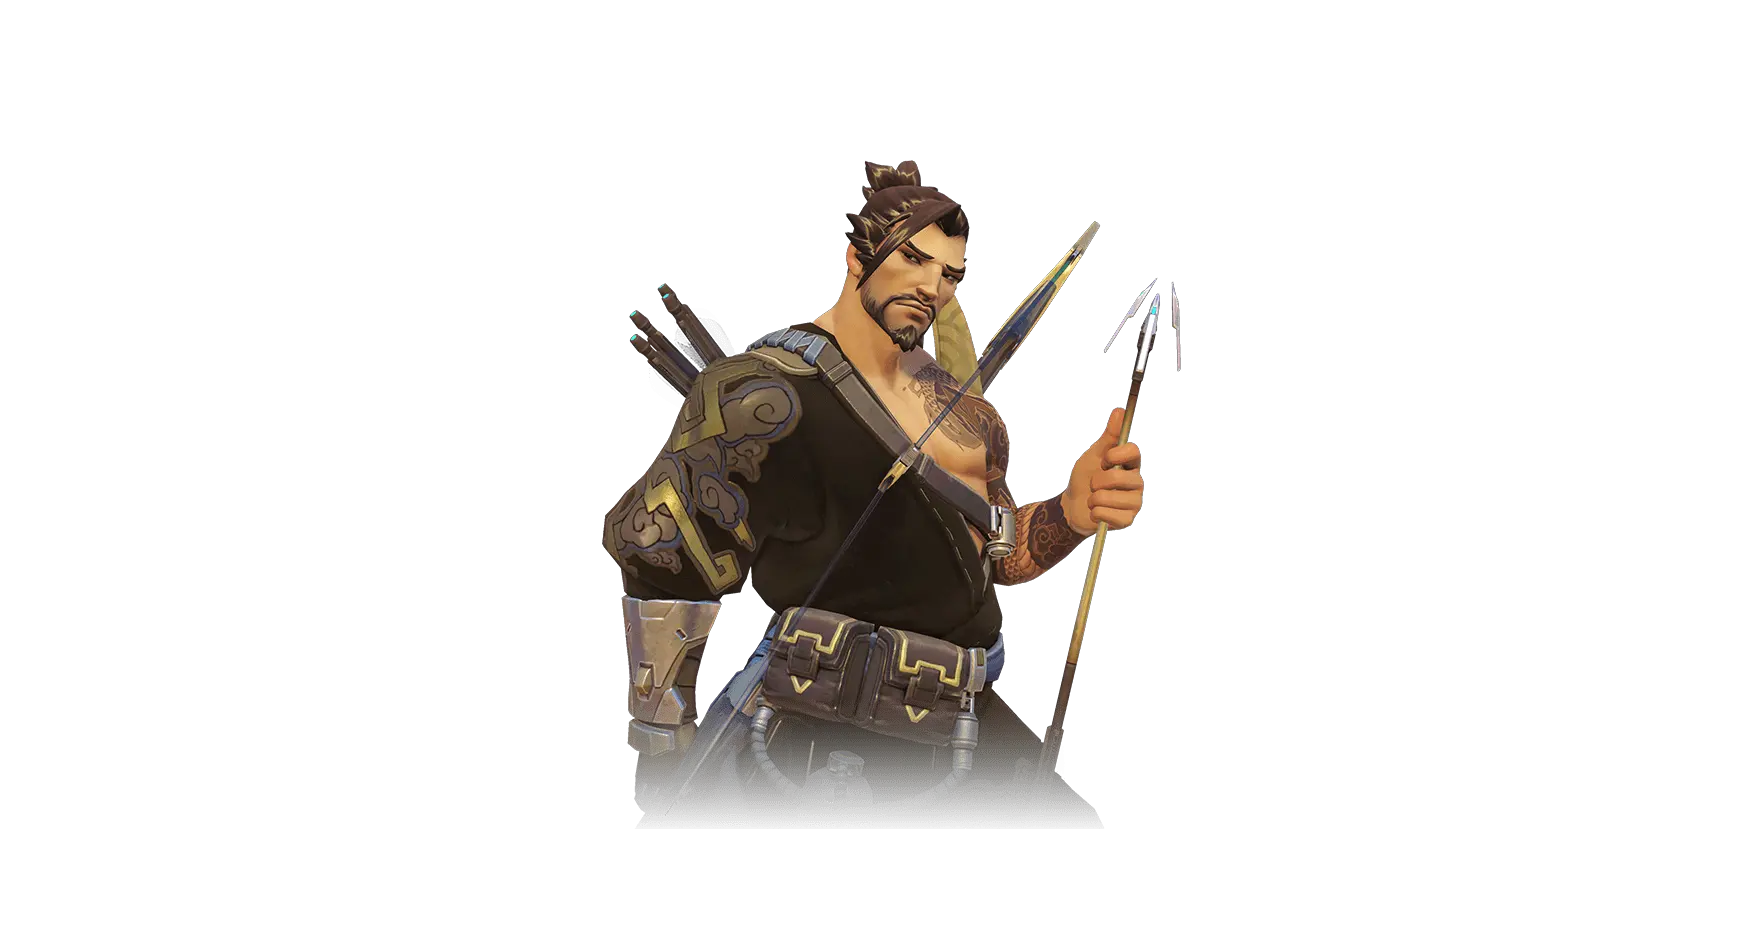 Download Free Png Hanzo Overwatch Death Battle Fanon Overwatch Hanzo Mccree Png